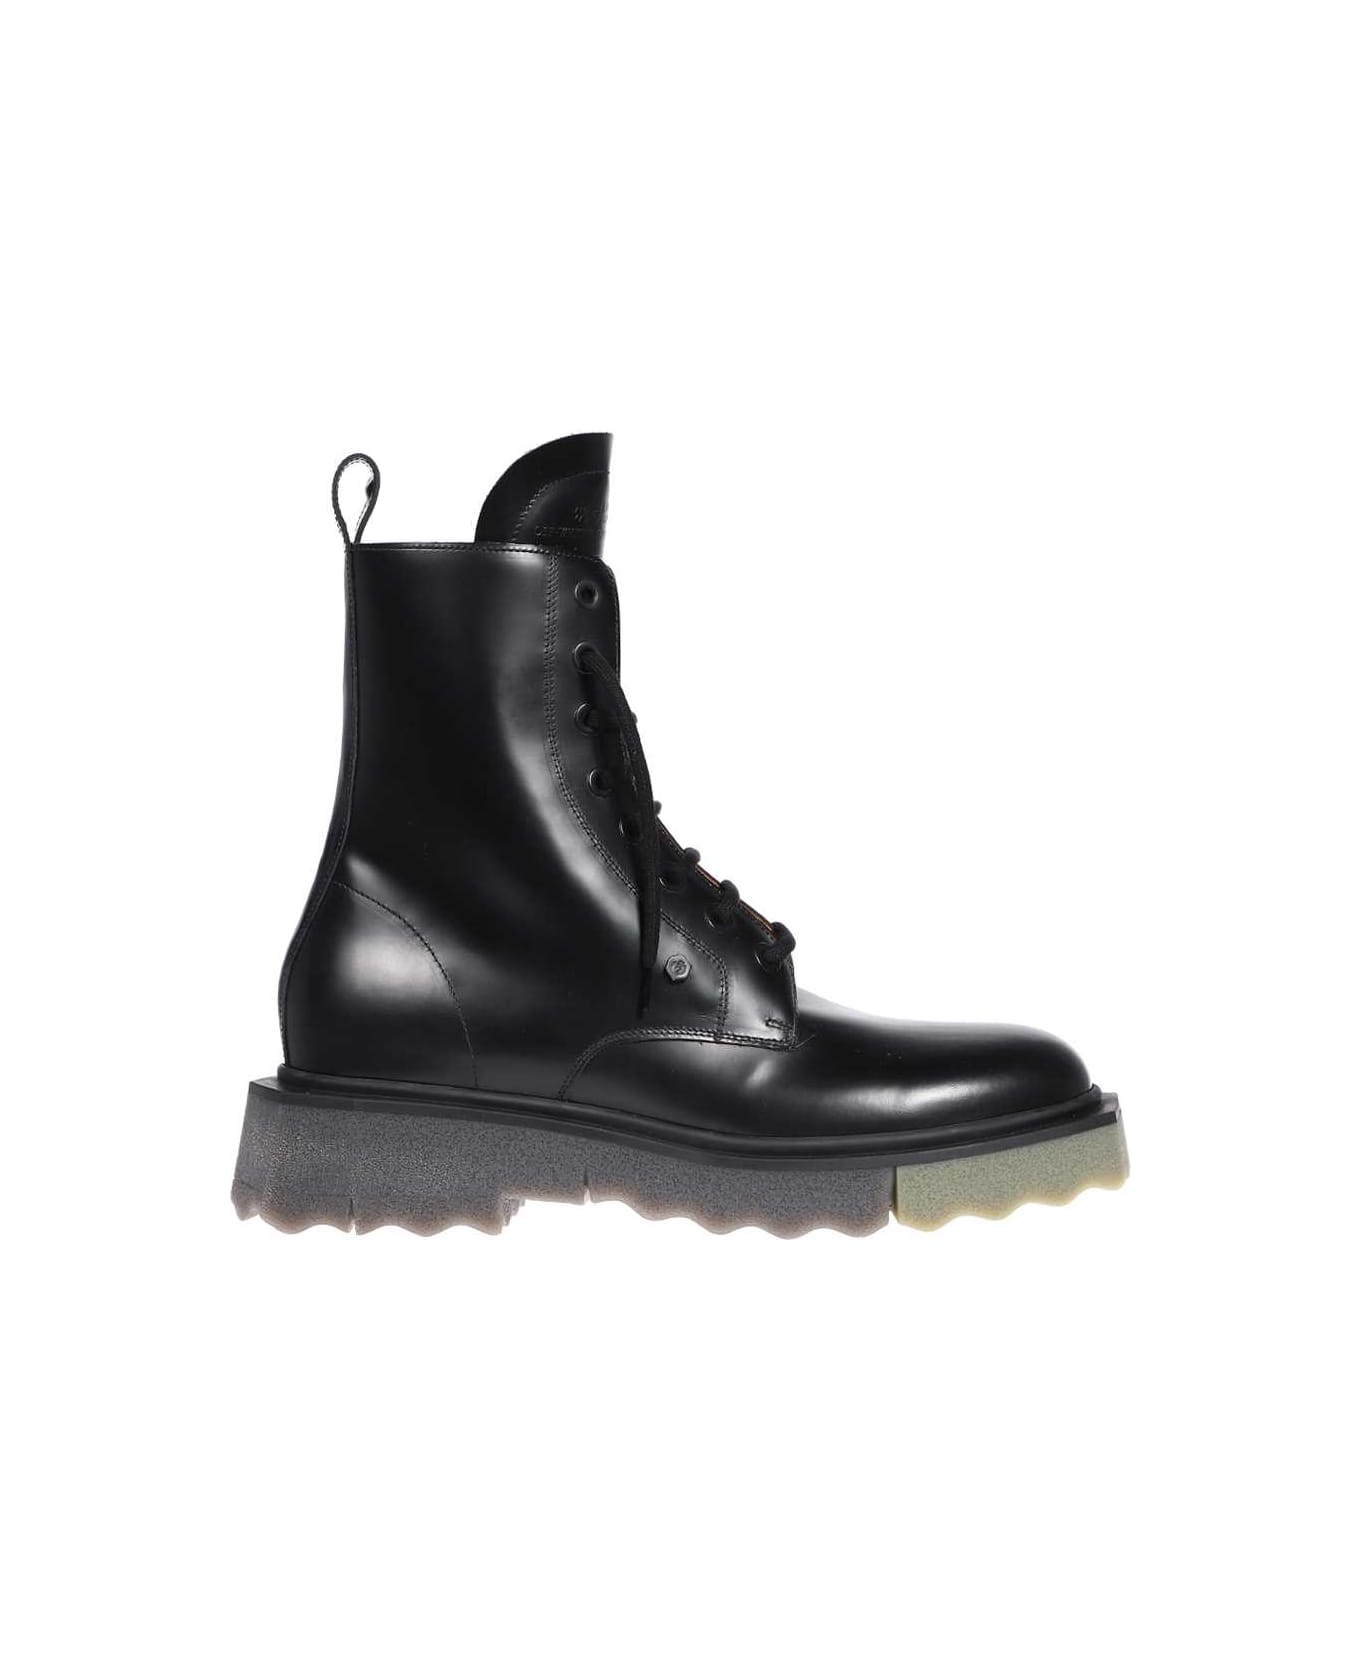 Off-White Leather Lace-up Boots - black